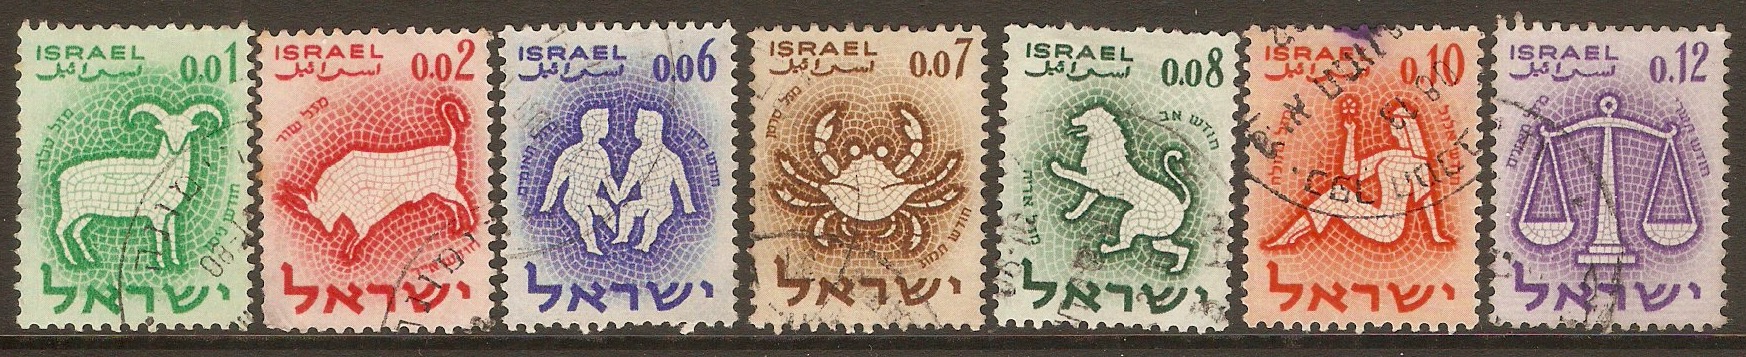 Israel 1961 50a Turquoise - Signs of the Zodiac series. SG209.